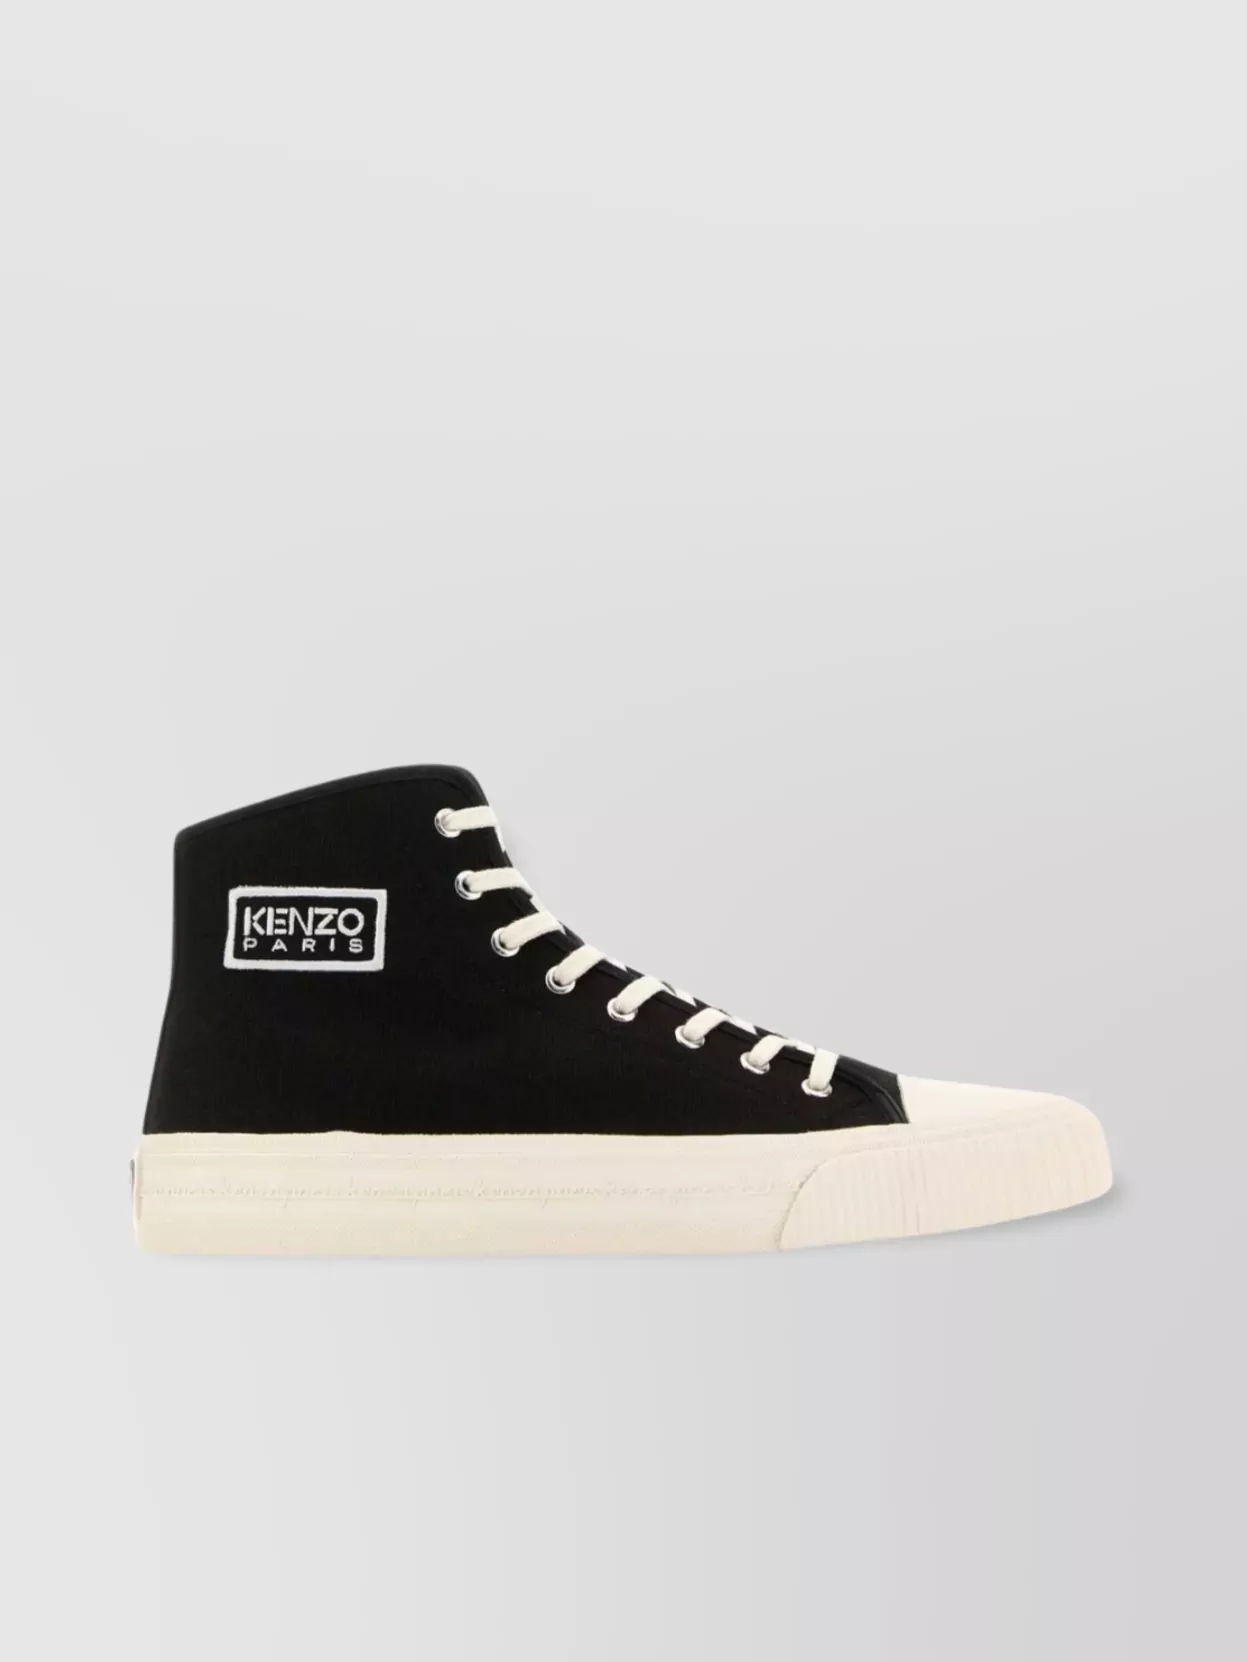 KENZO CANVAS FOXY HIGH-TOP SNEAKERS